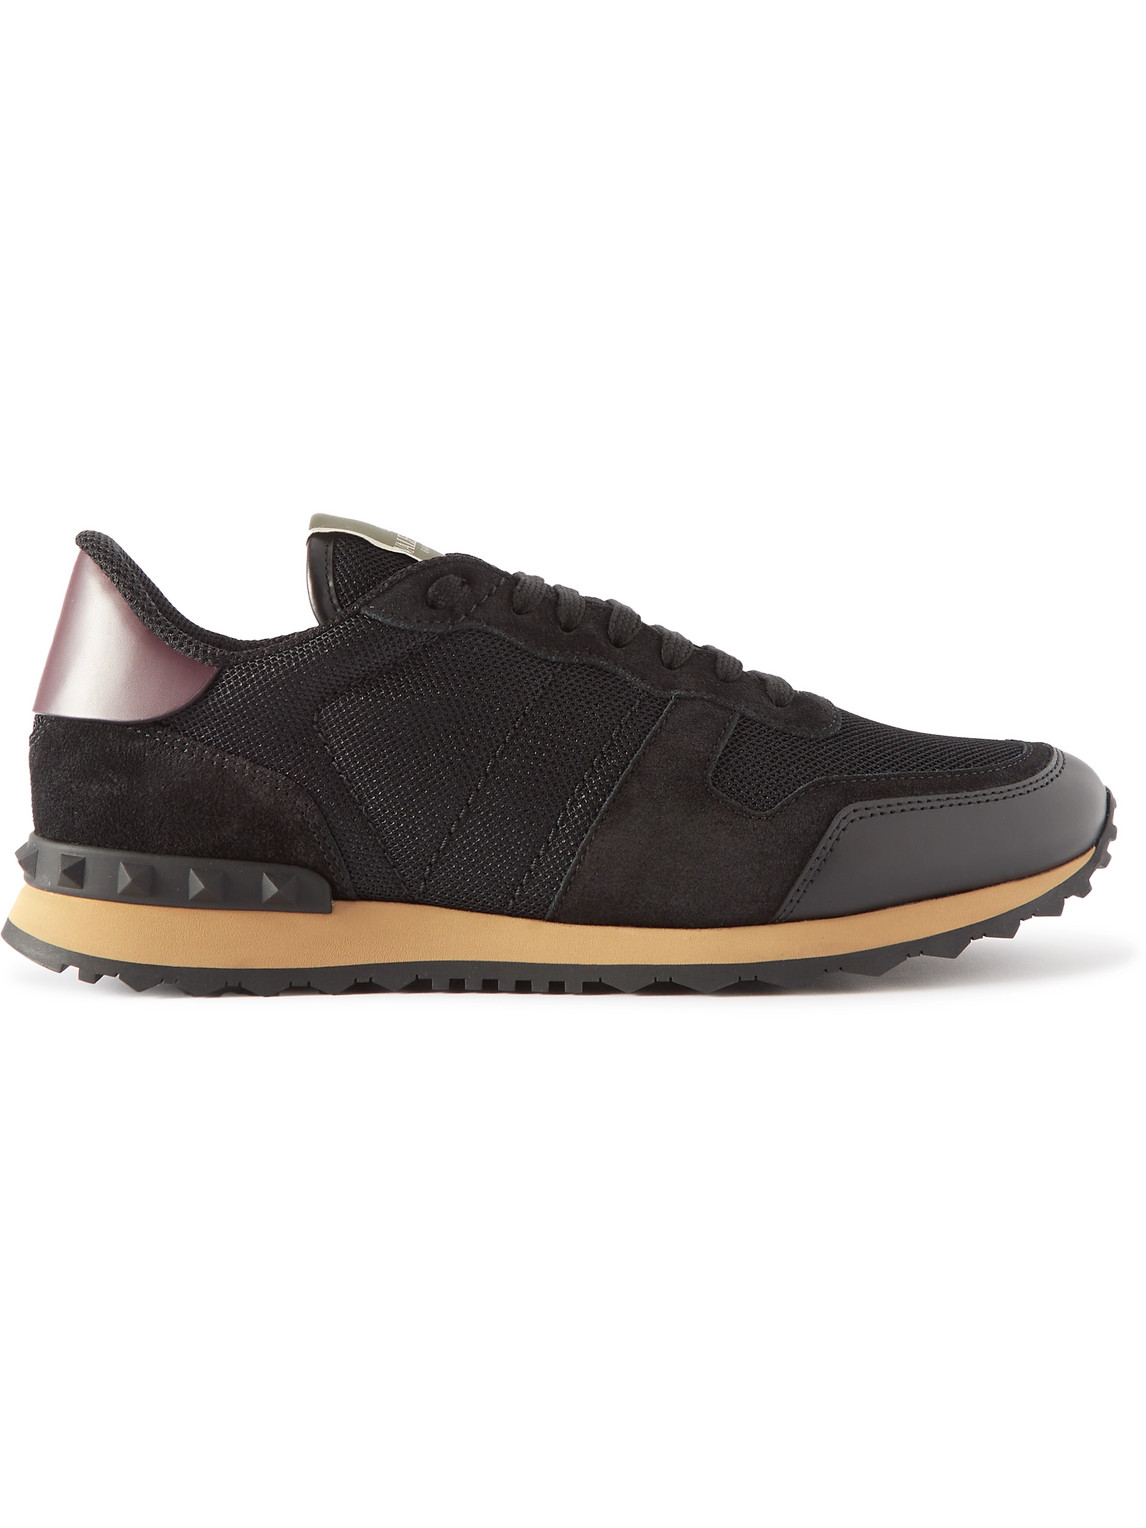 Valentino Garavani Rockrunner Leather-Trimmed Suede and Mesh Sneakers